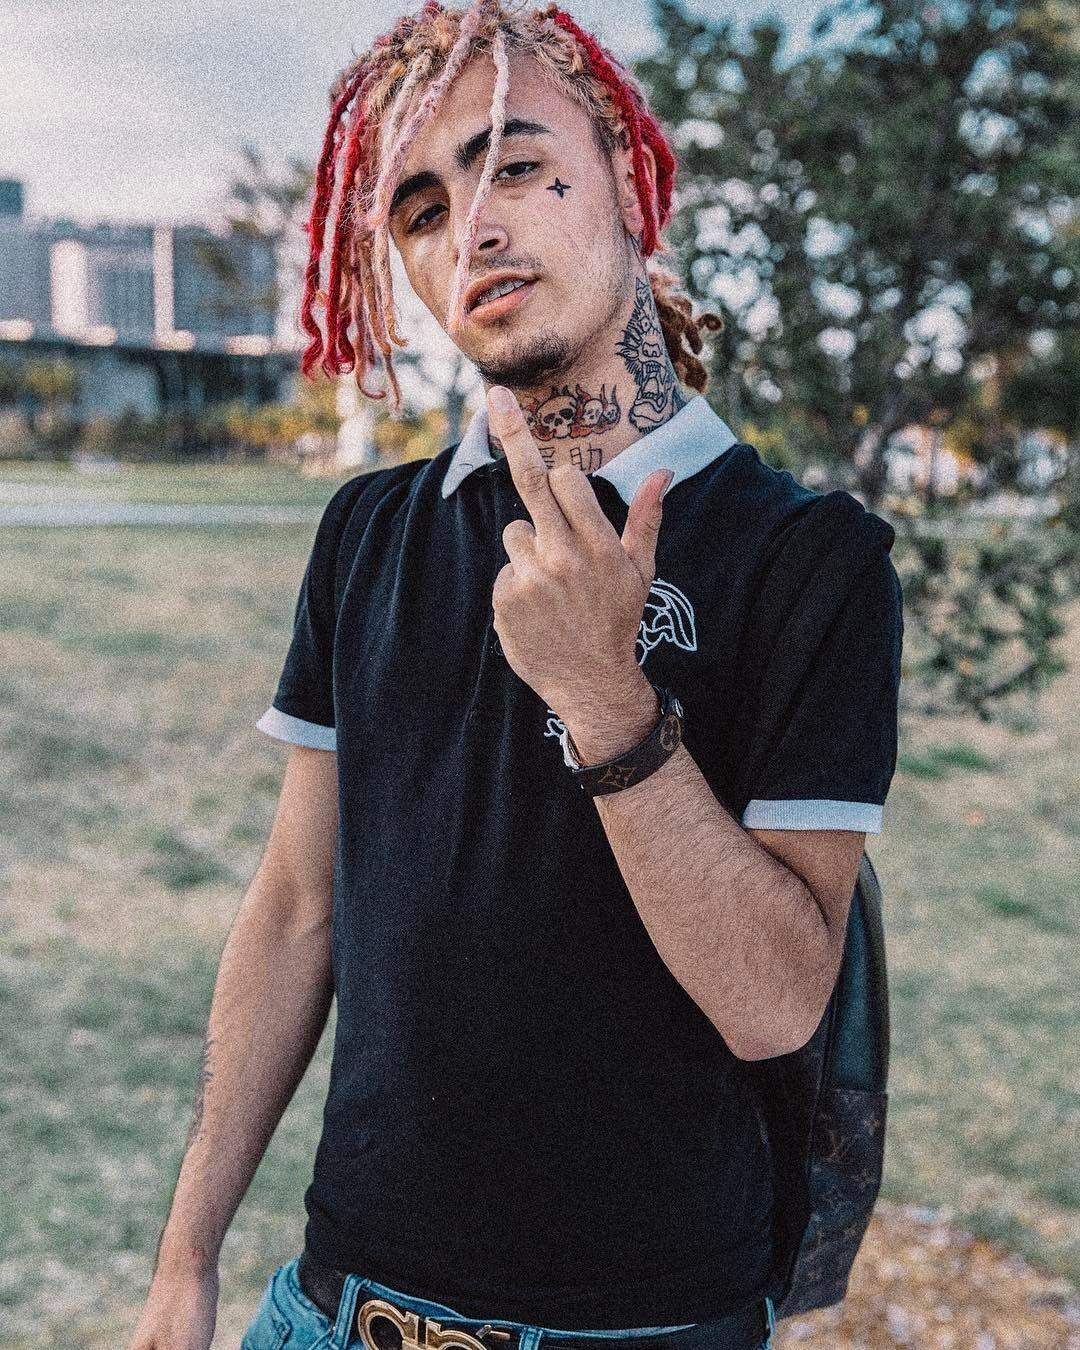 lil pump 1080P 2k 4k Full HD Wallpapers Backgrounds Free Download   Wallpaper Crafter